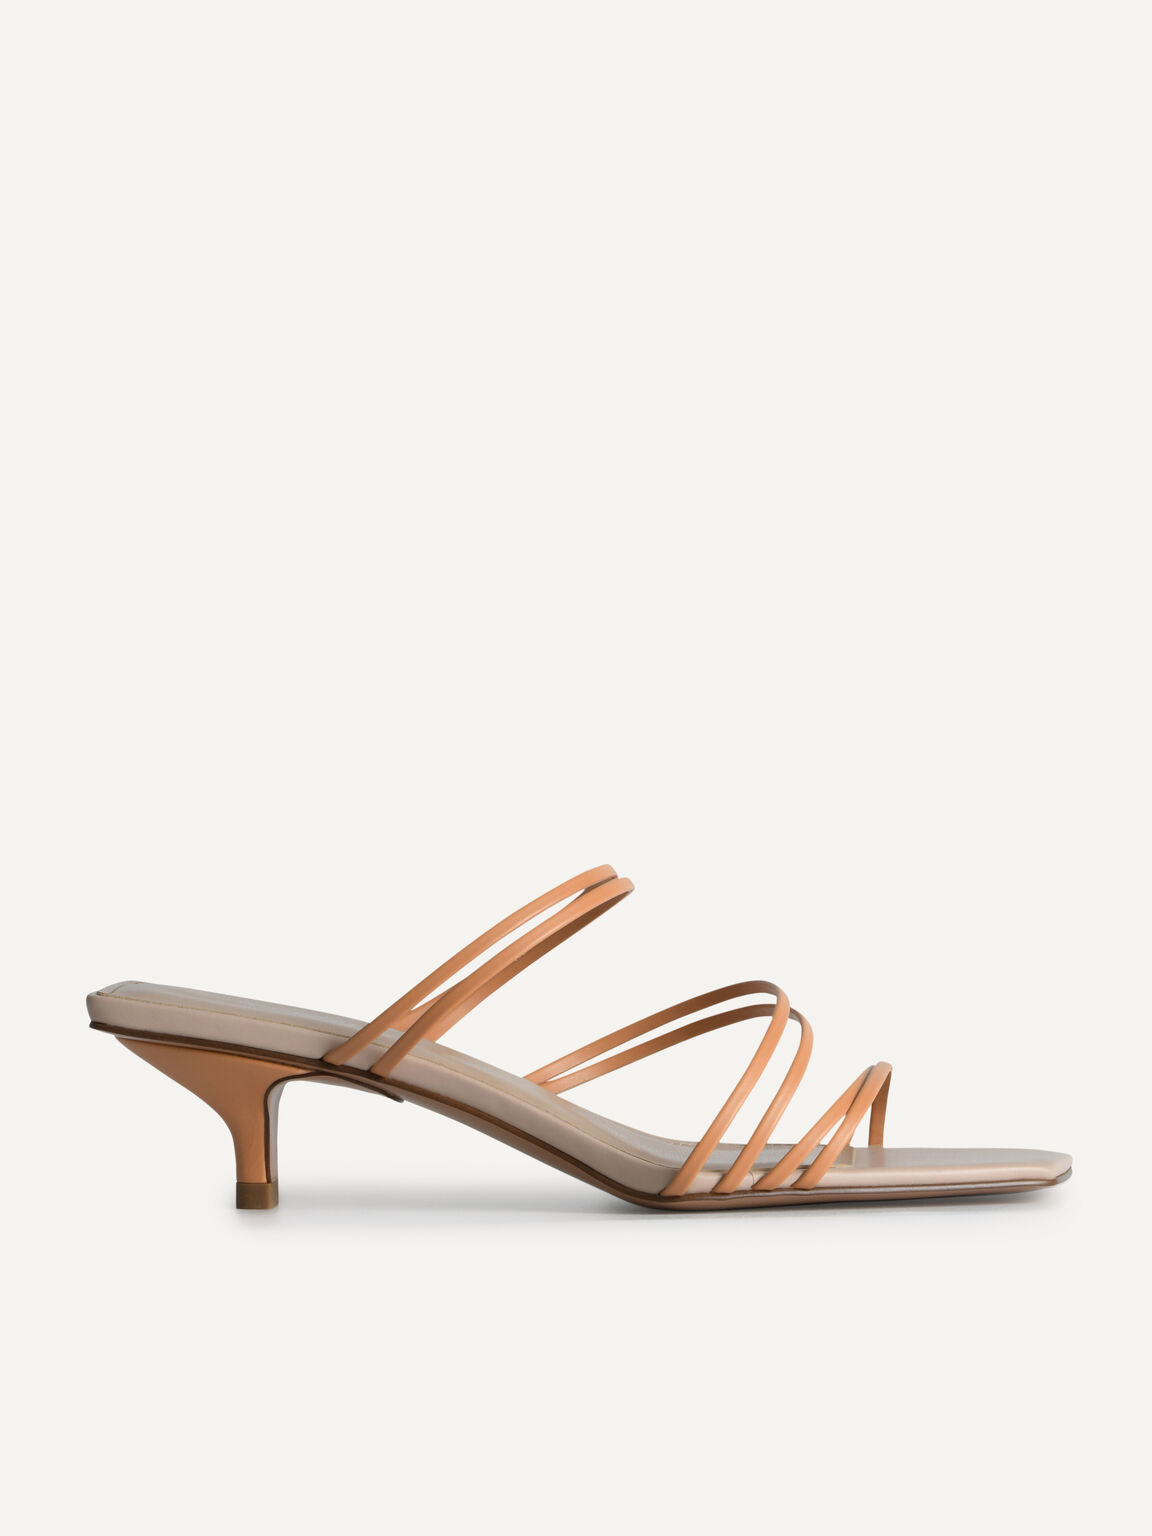 Strappy Heeled Sandals, Camel